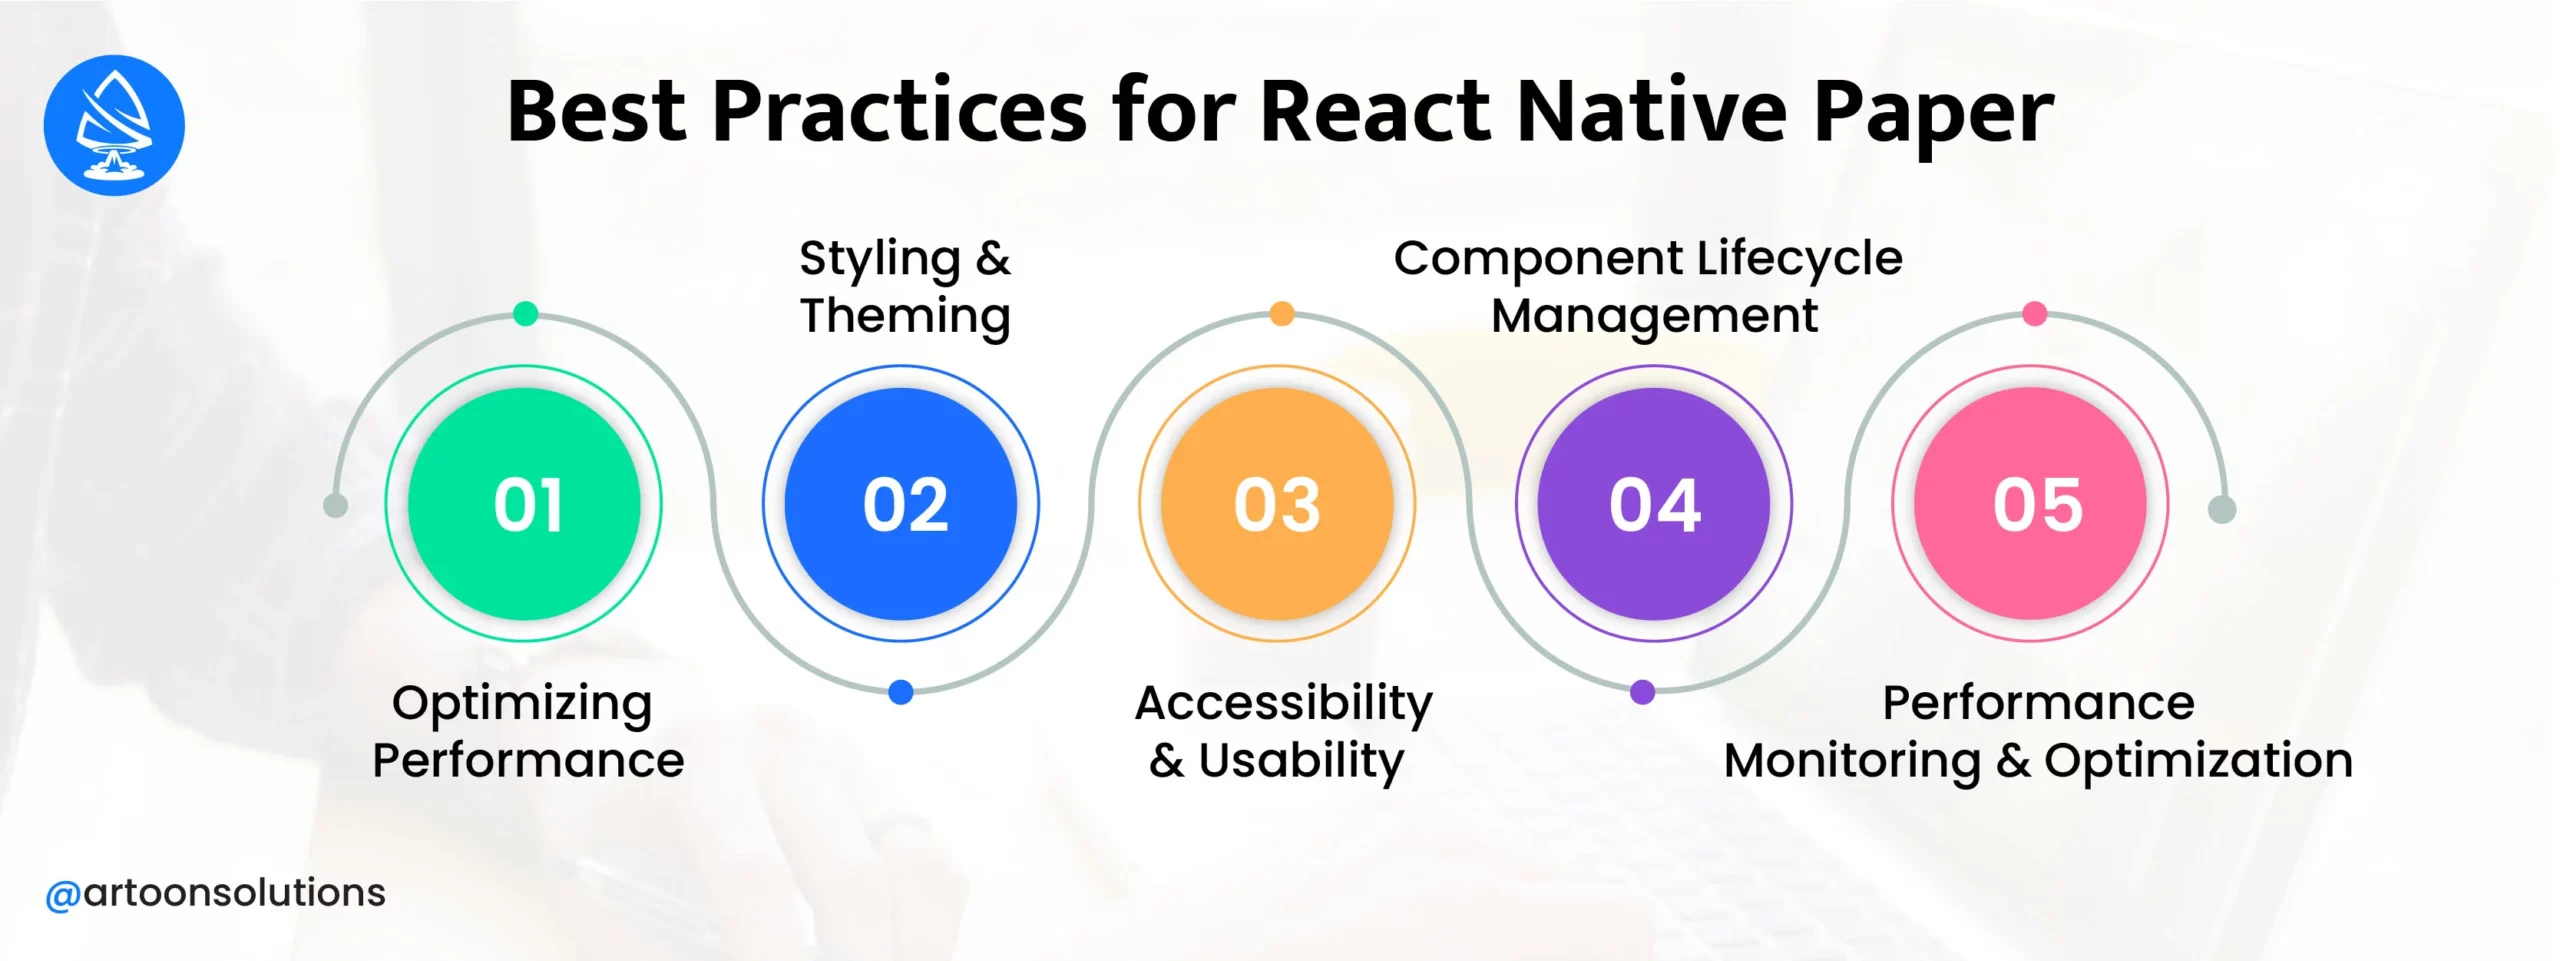 Best Practices for React